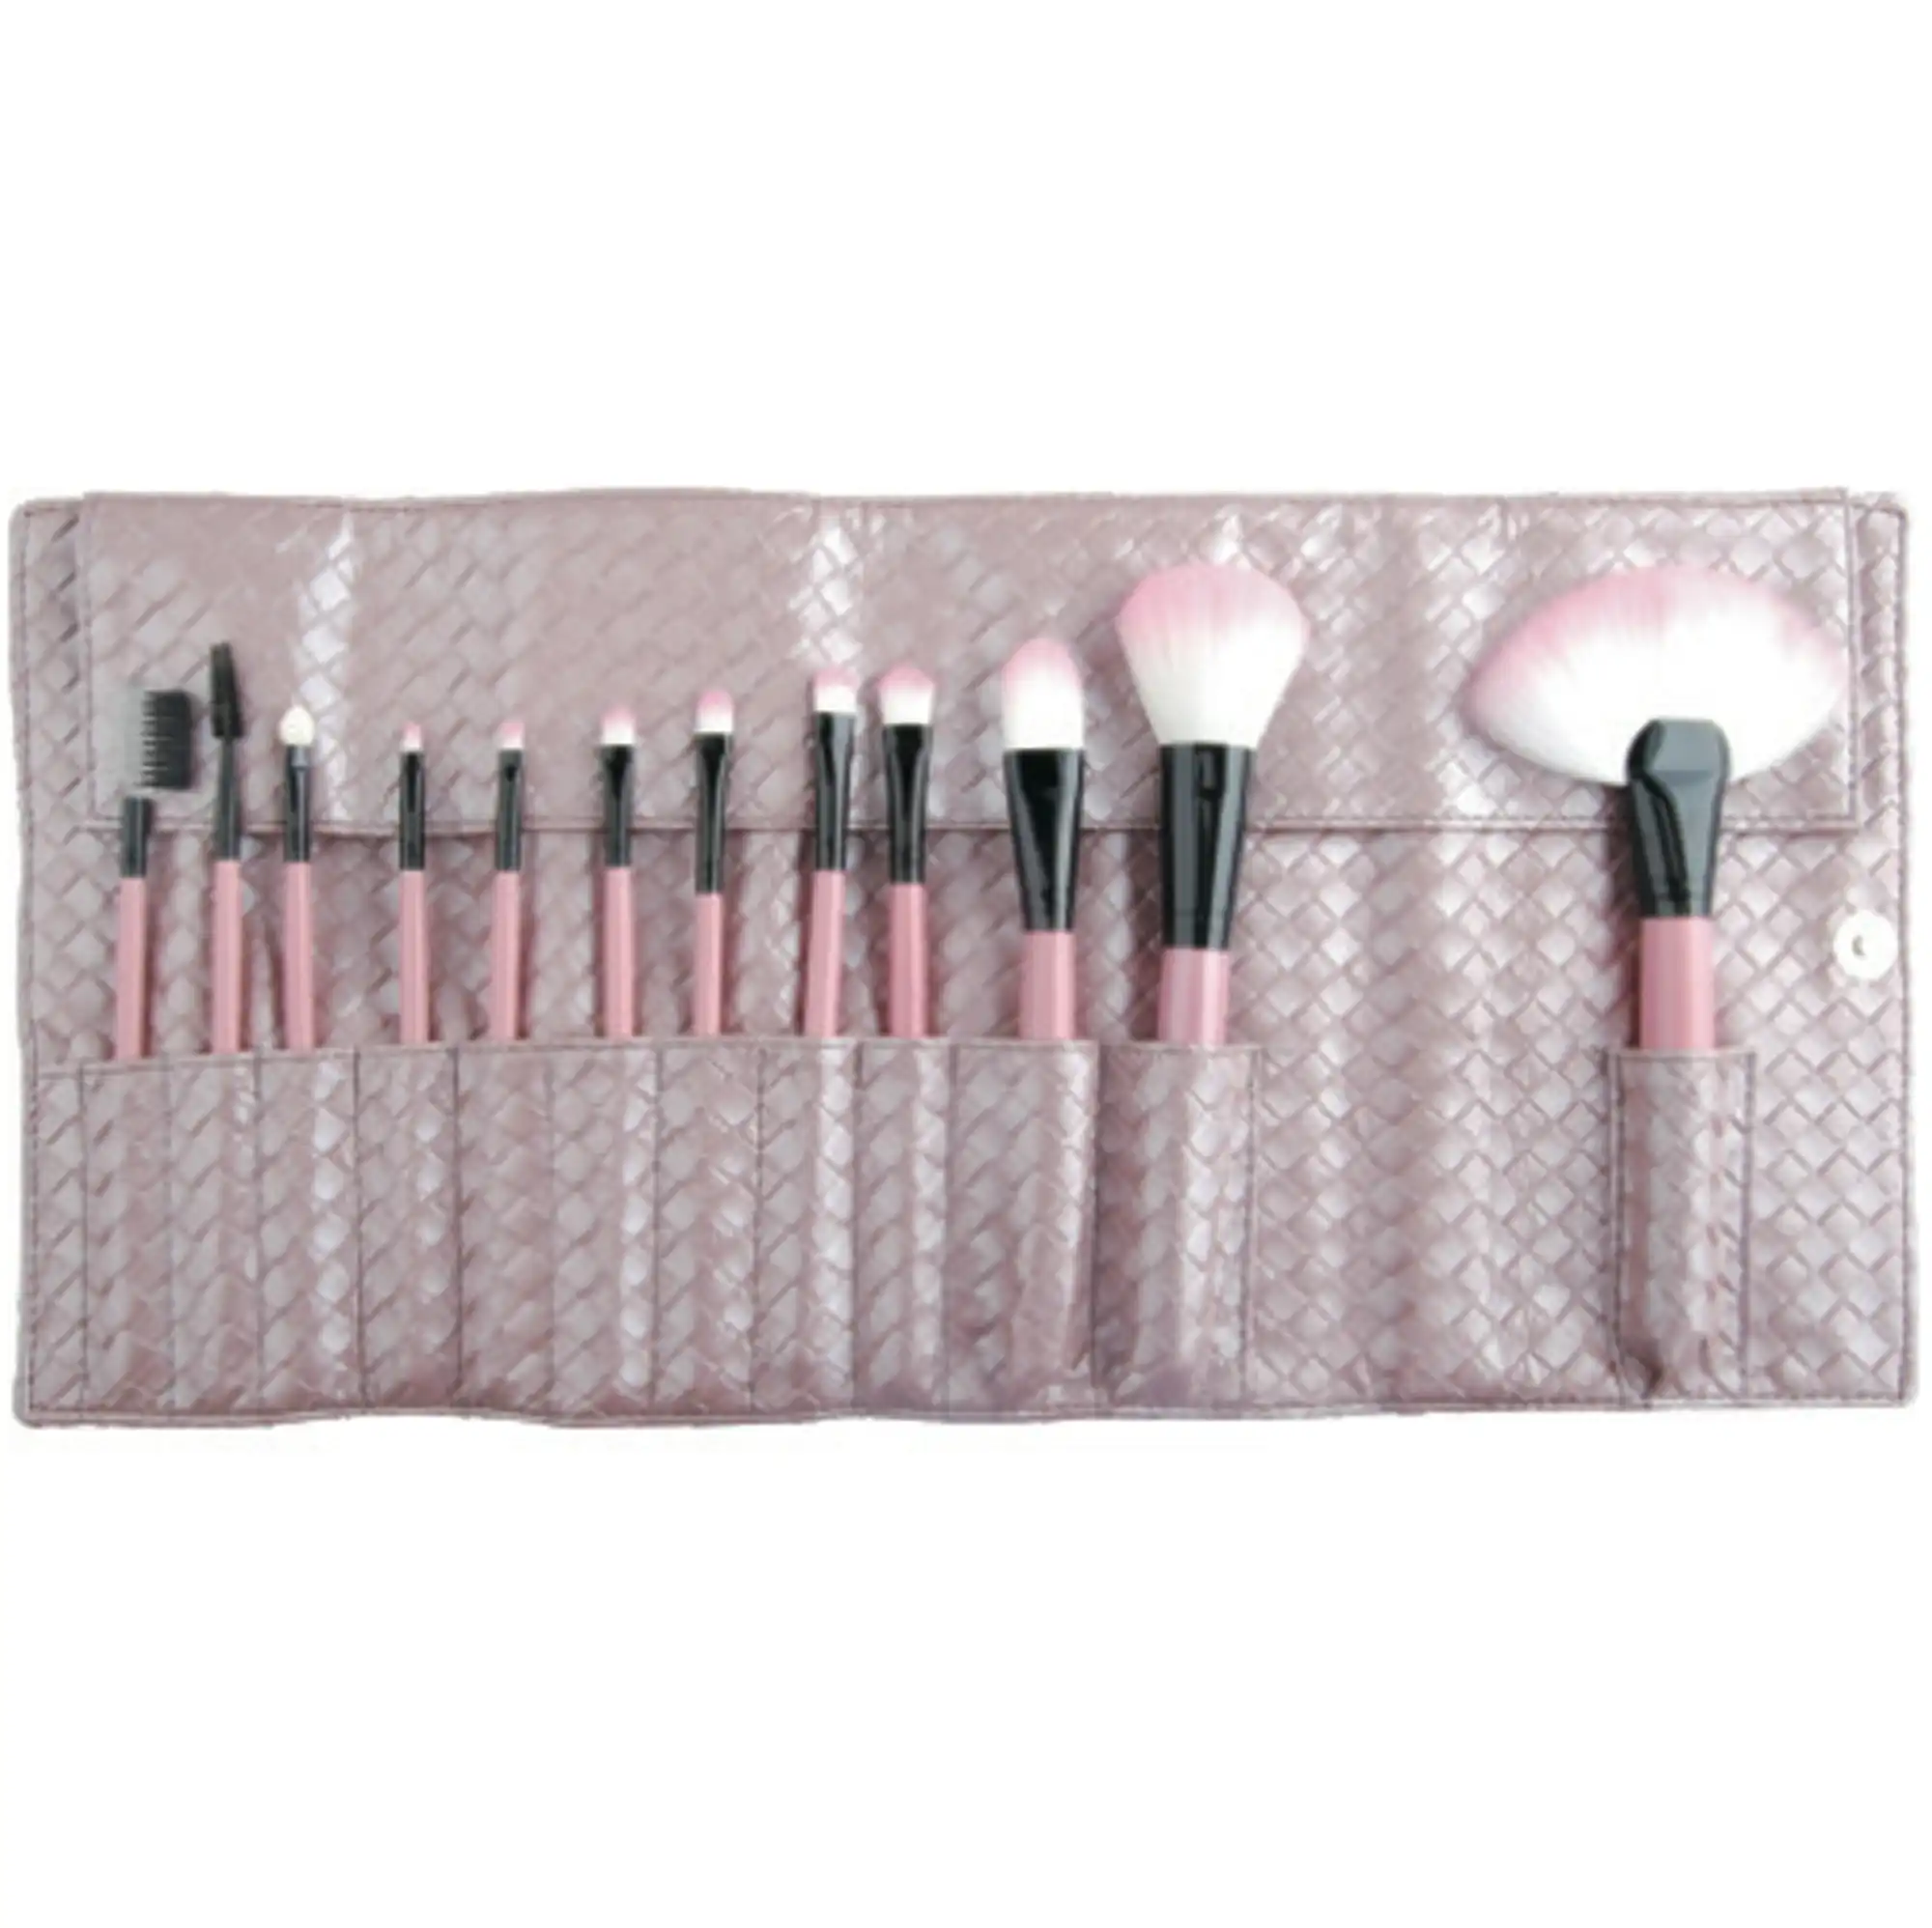 12 Piece Professional Makeup Brush Set Soft Bristle with Carry Case Pink